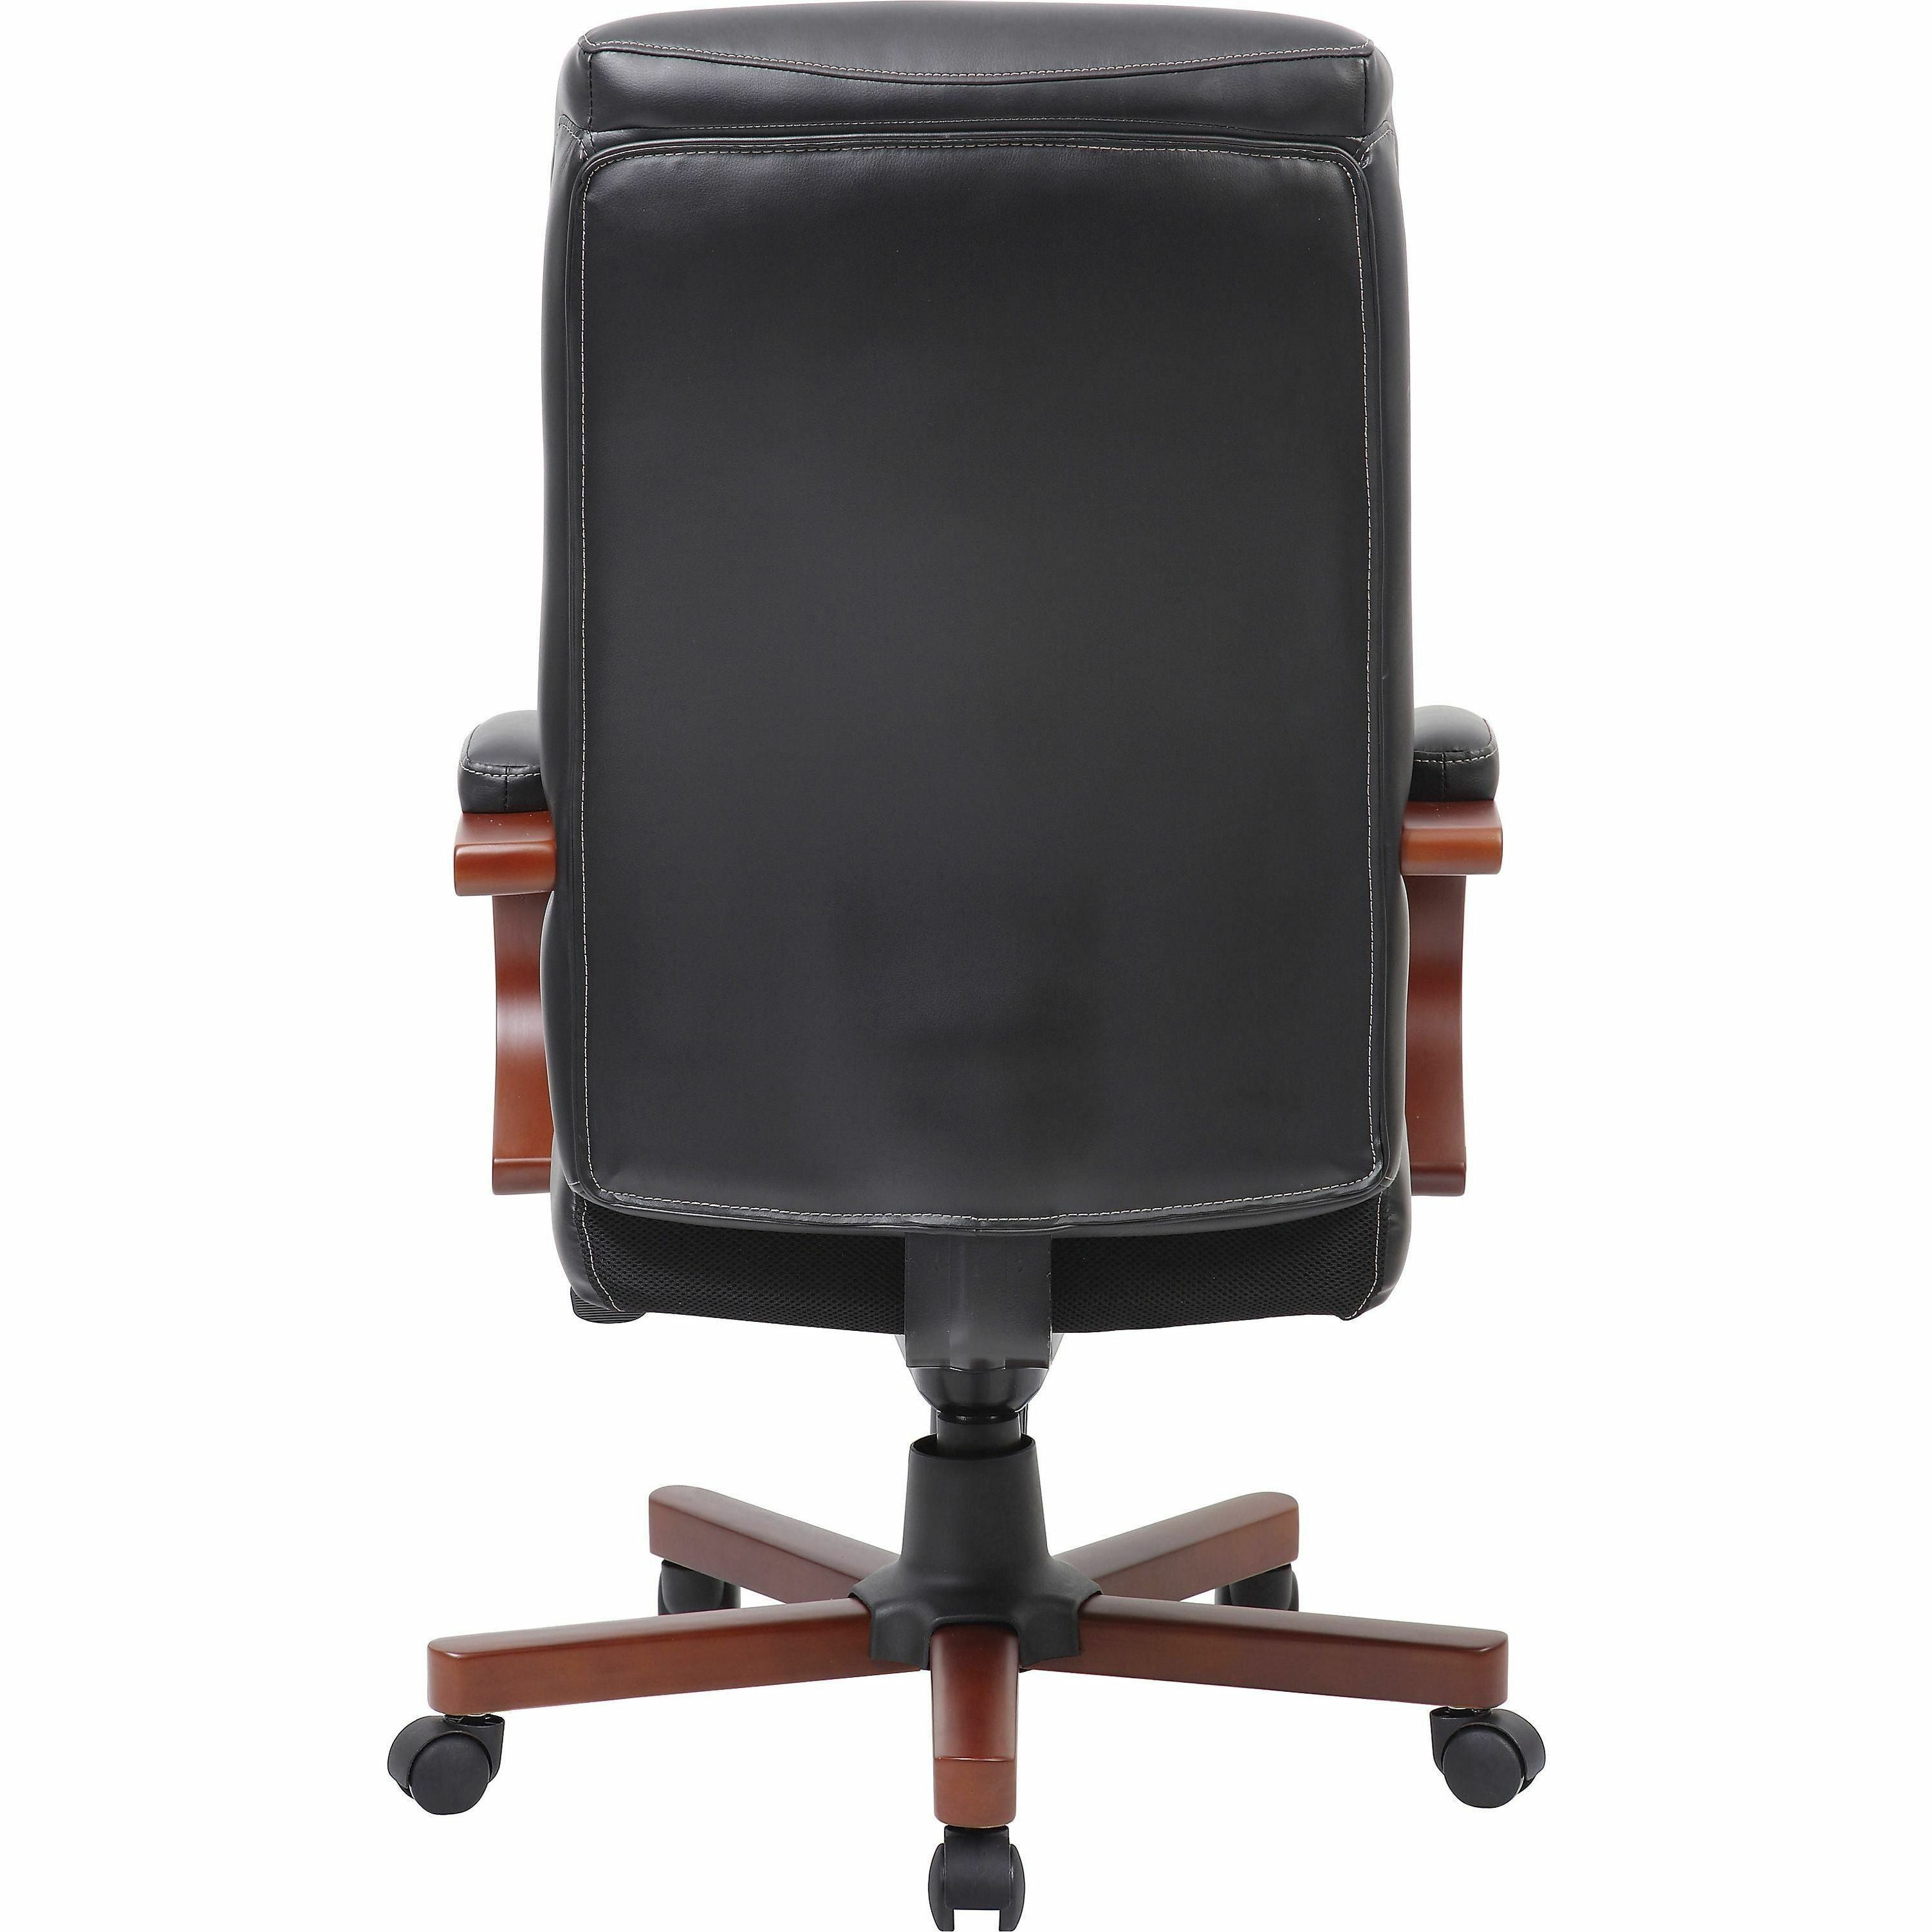 lorell-executive-high-back-wood-finish-office-chair-black-bonded-leather-seat-black-bonded-leather-back-high-back-black-mahogany-1-each_llr69532 - 3